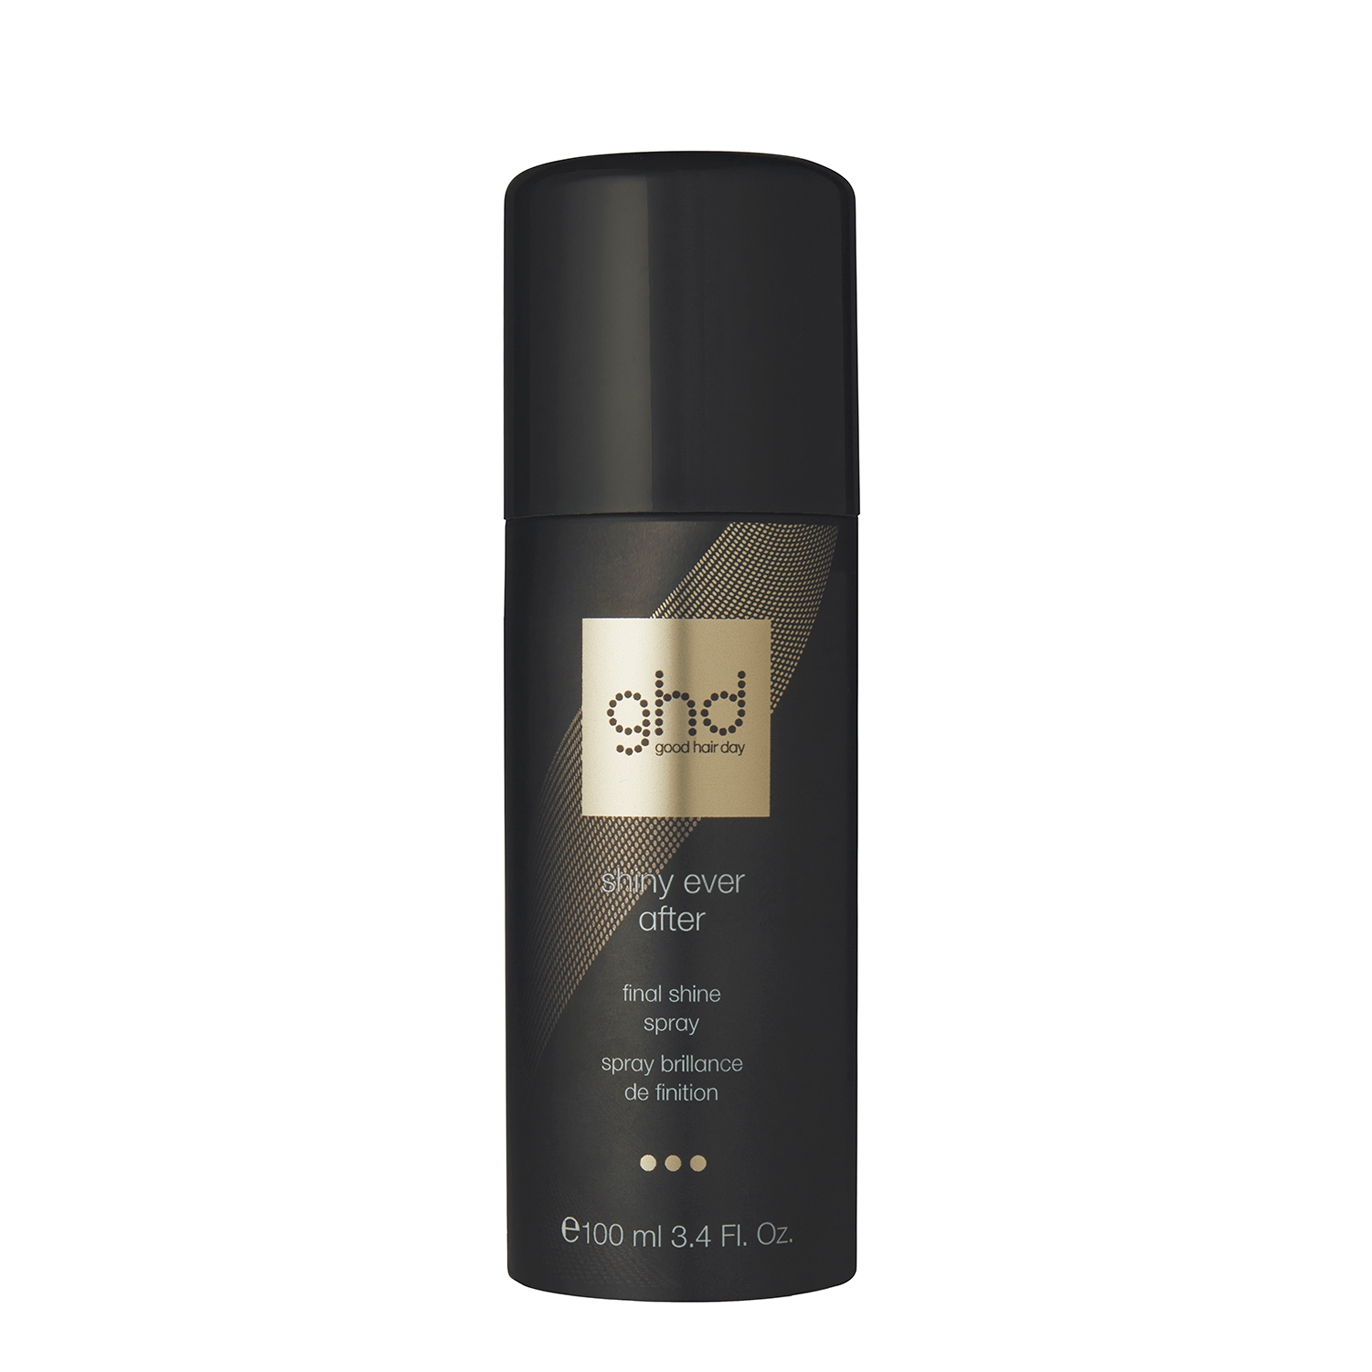 GHD Shiny Ever After - Final Shine Spray 100ml, Haircare, Healthy